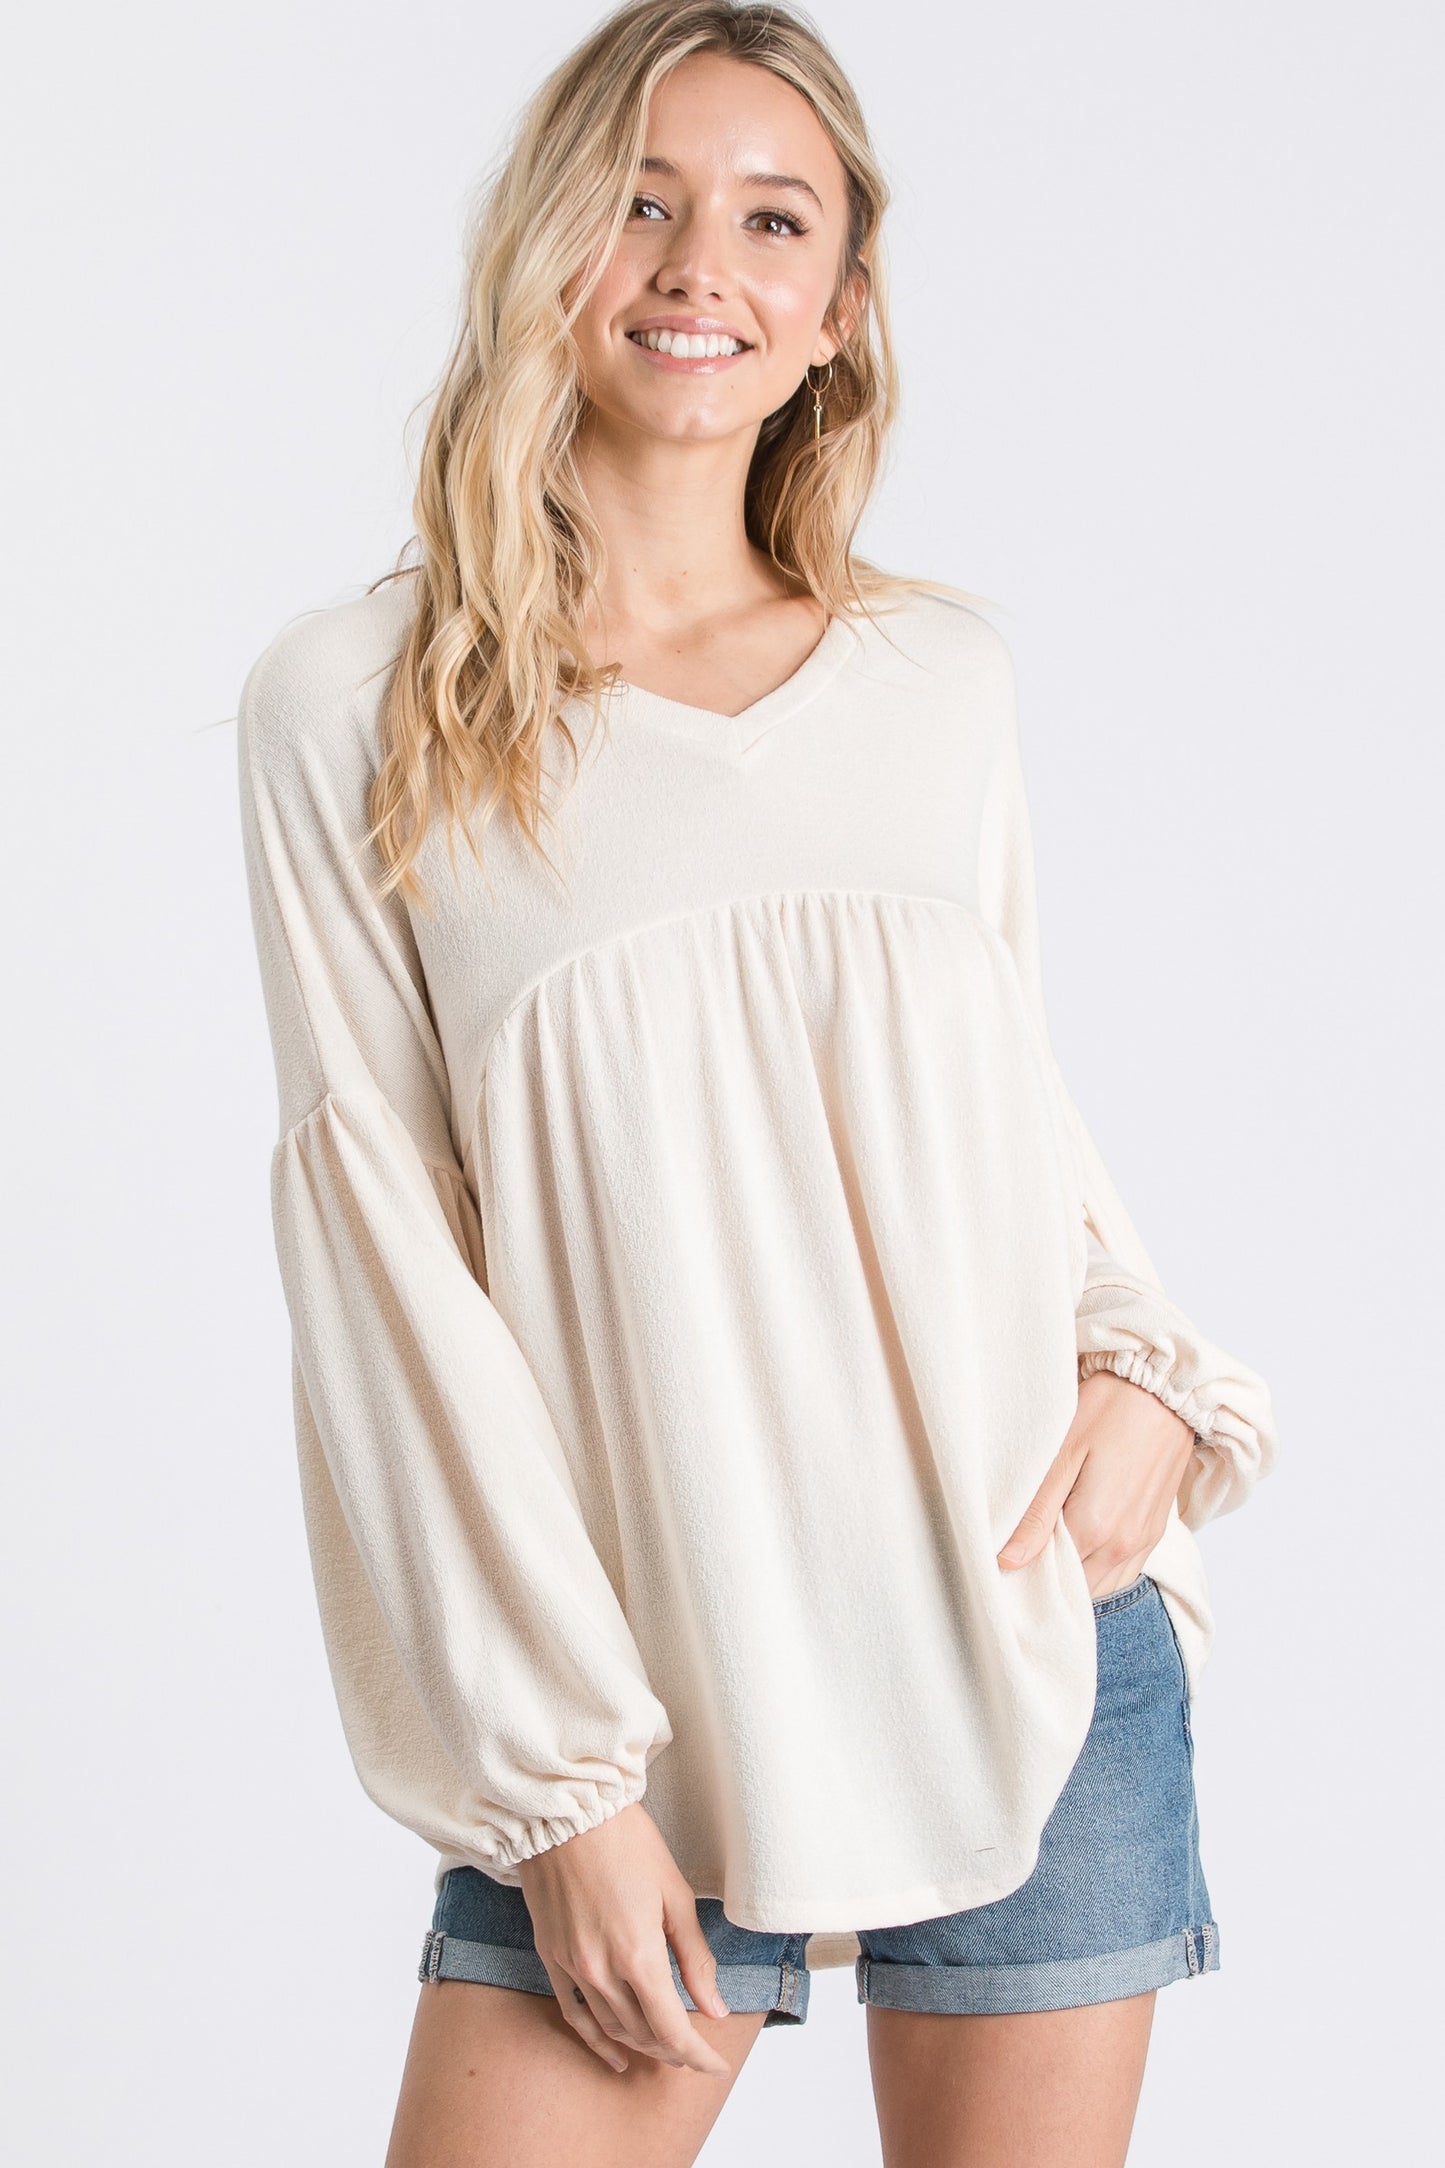 Knit Babydoll Top in Ivory